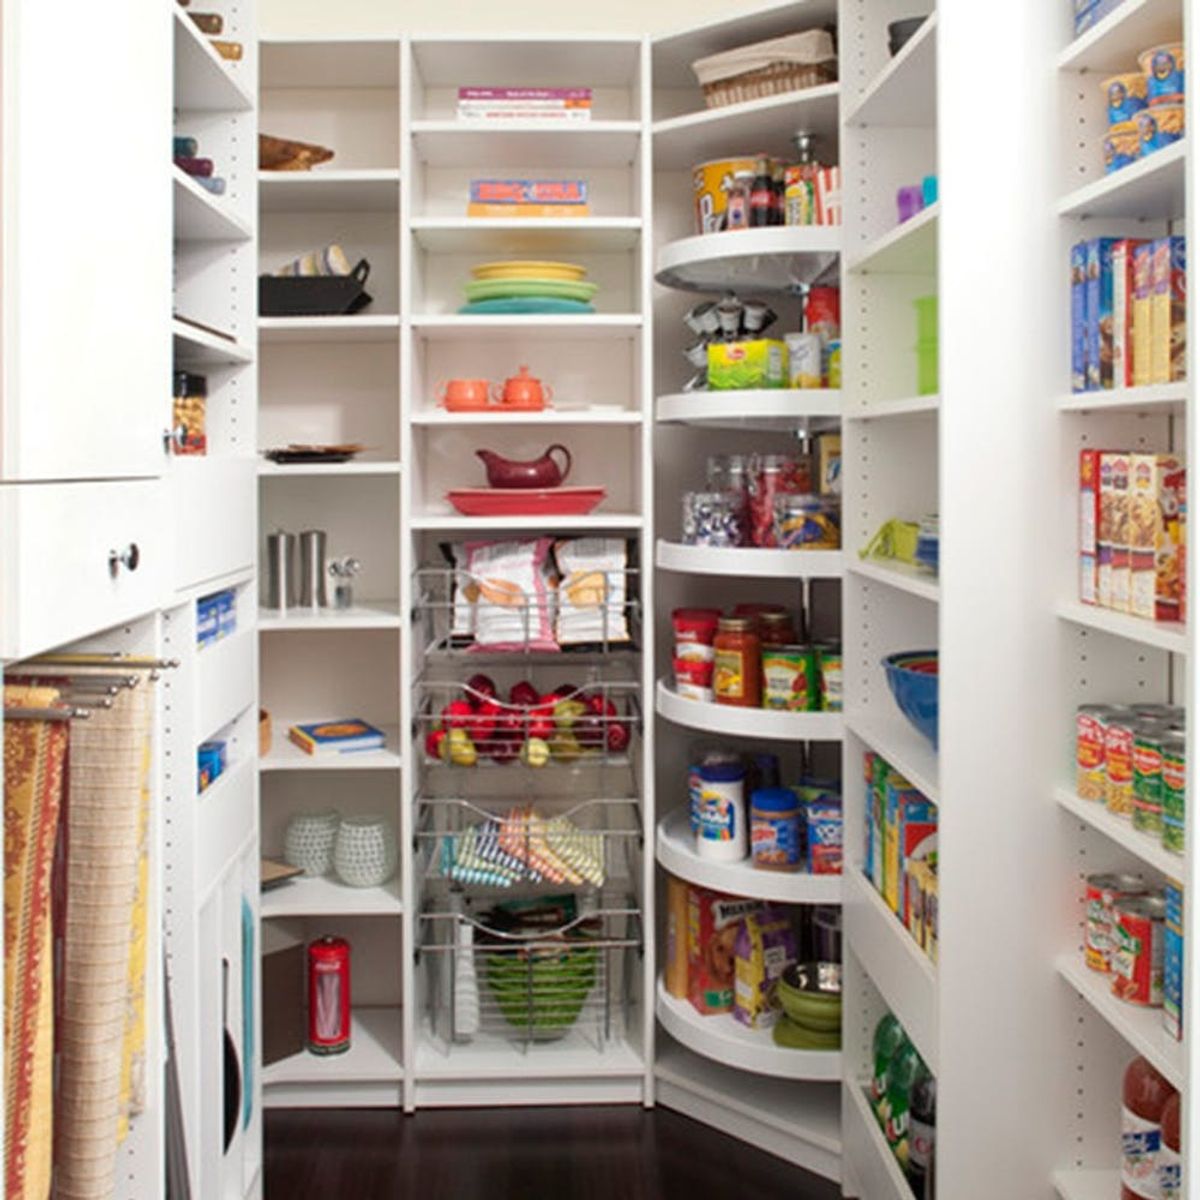 8 Steps to Planning the Perfect Pantry